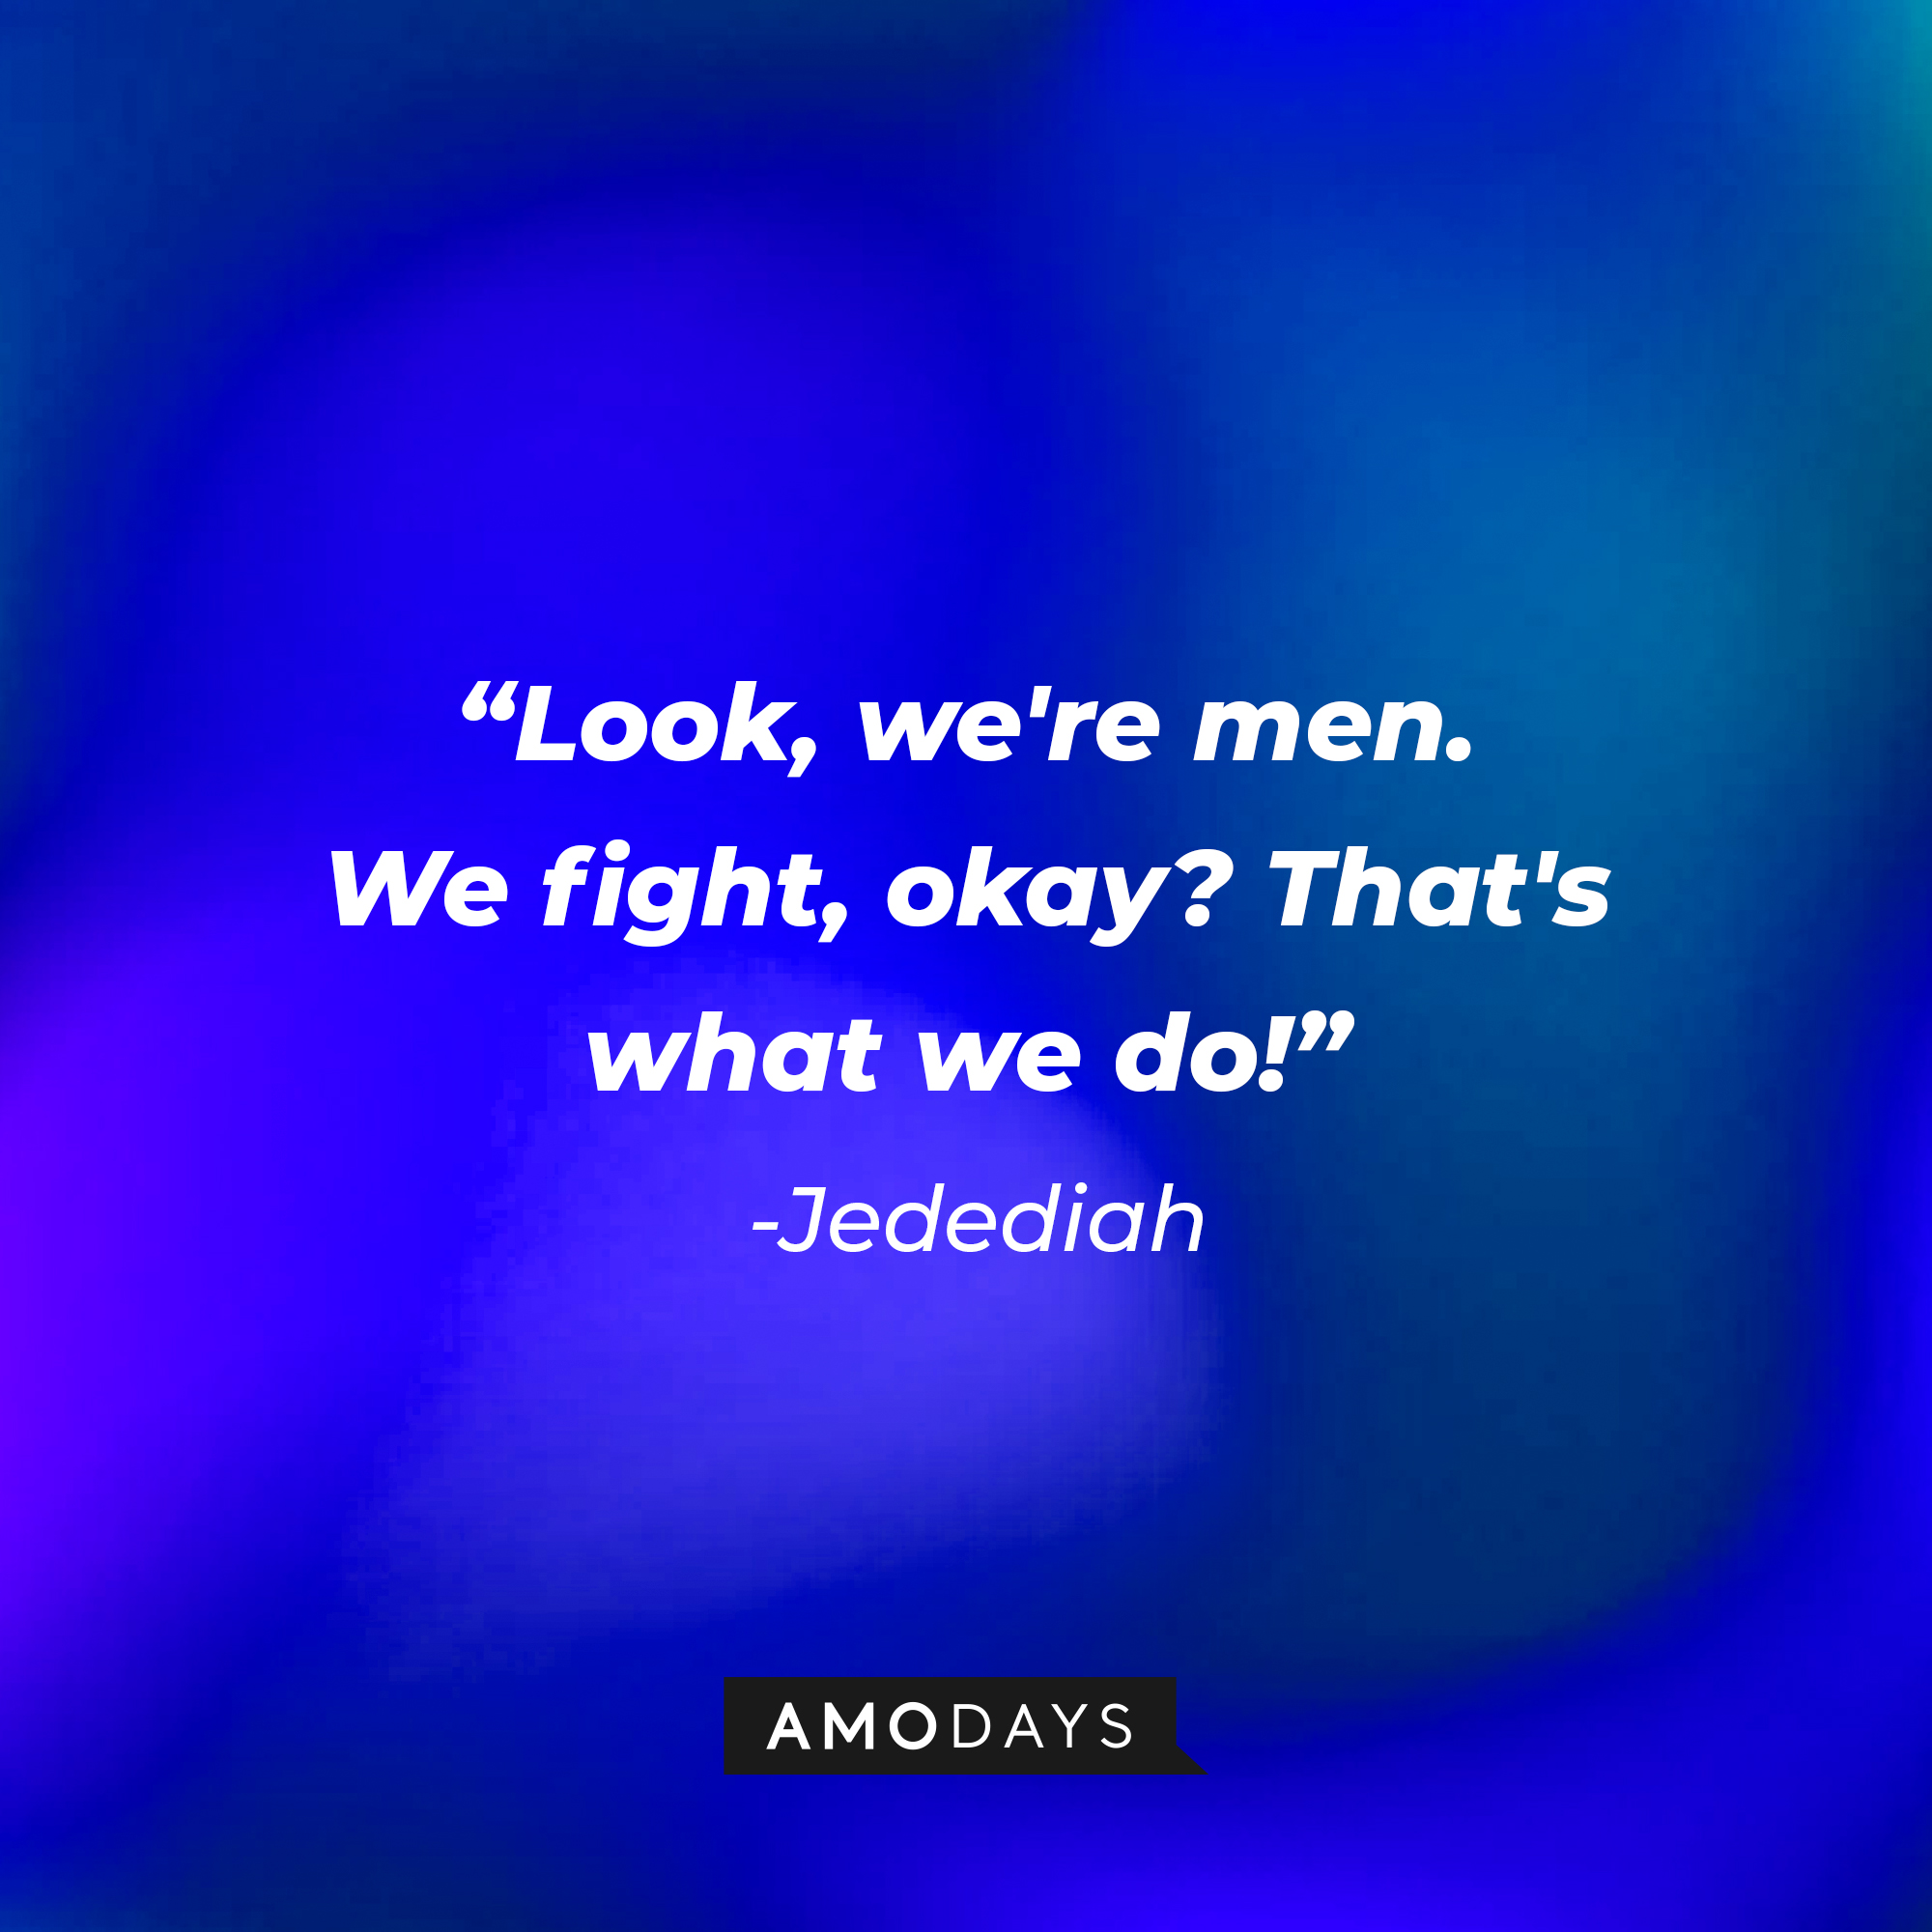 Jedediah's quote: “Look, we're men. We fight, okay? That's what we do!” | Source: Amodays